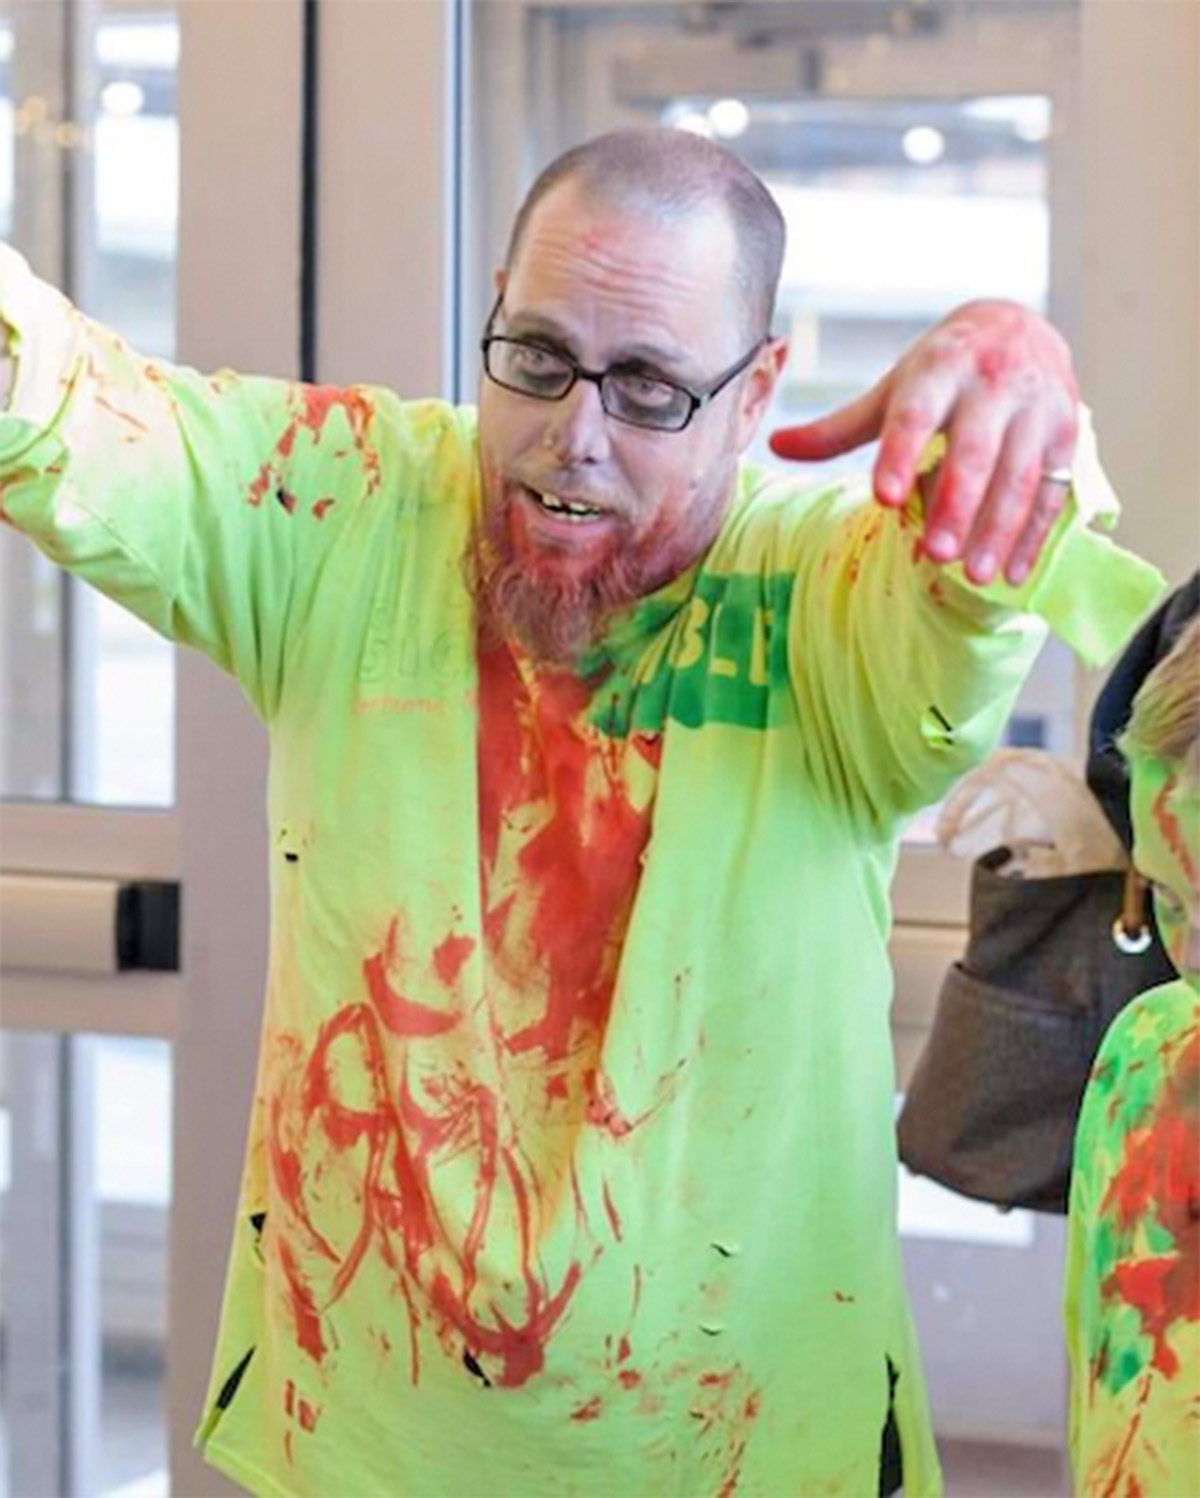 A zombie attendee goes hunting for brains at a previous Sci-Fi Horror Fest.